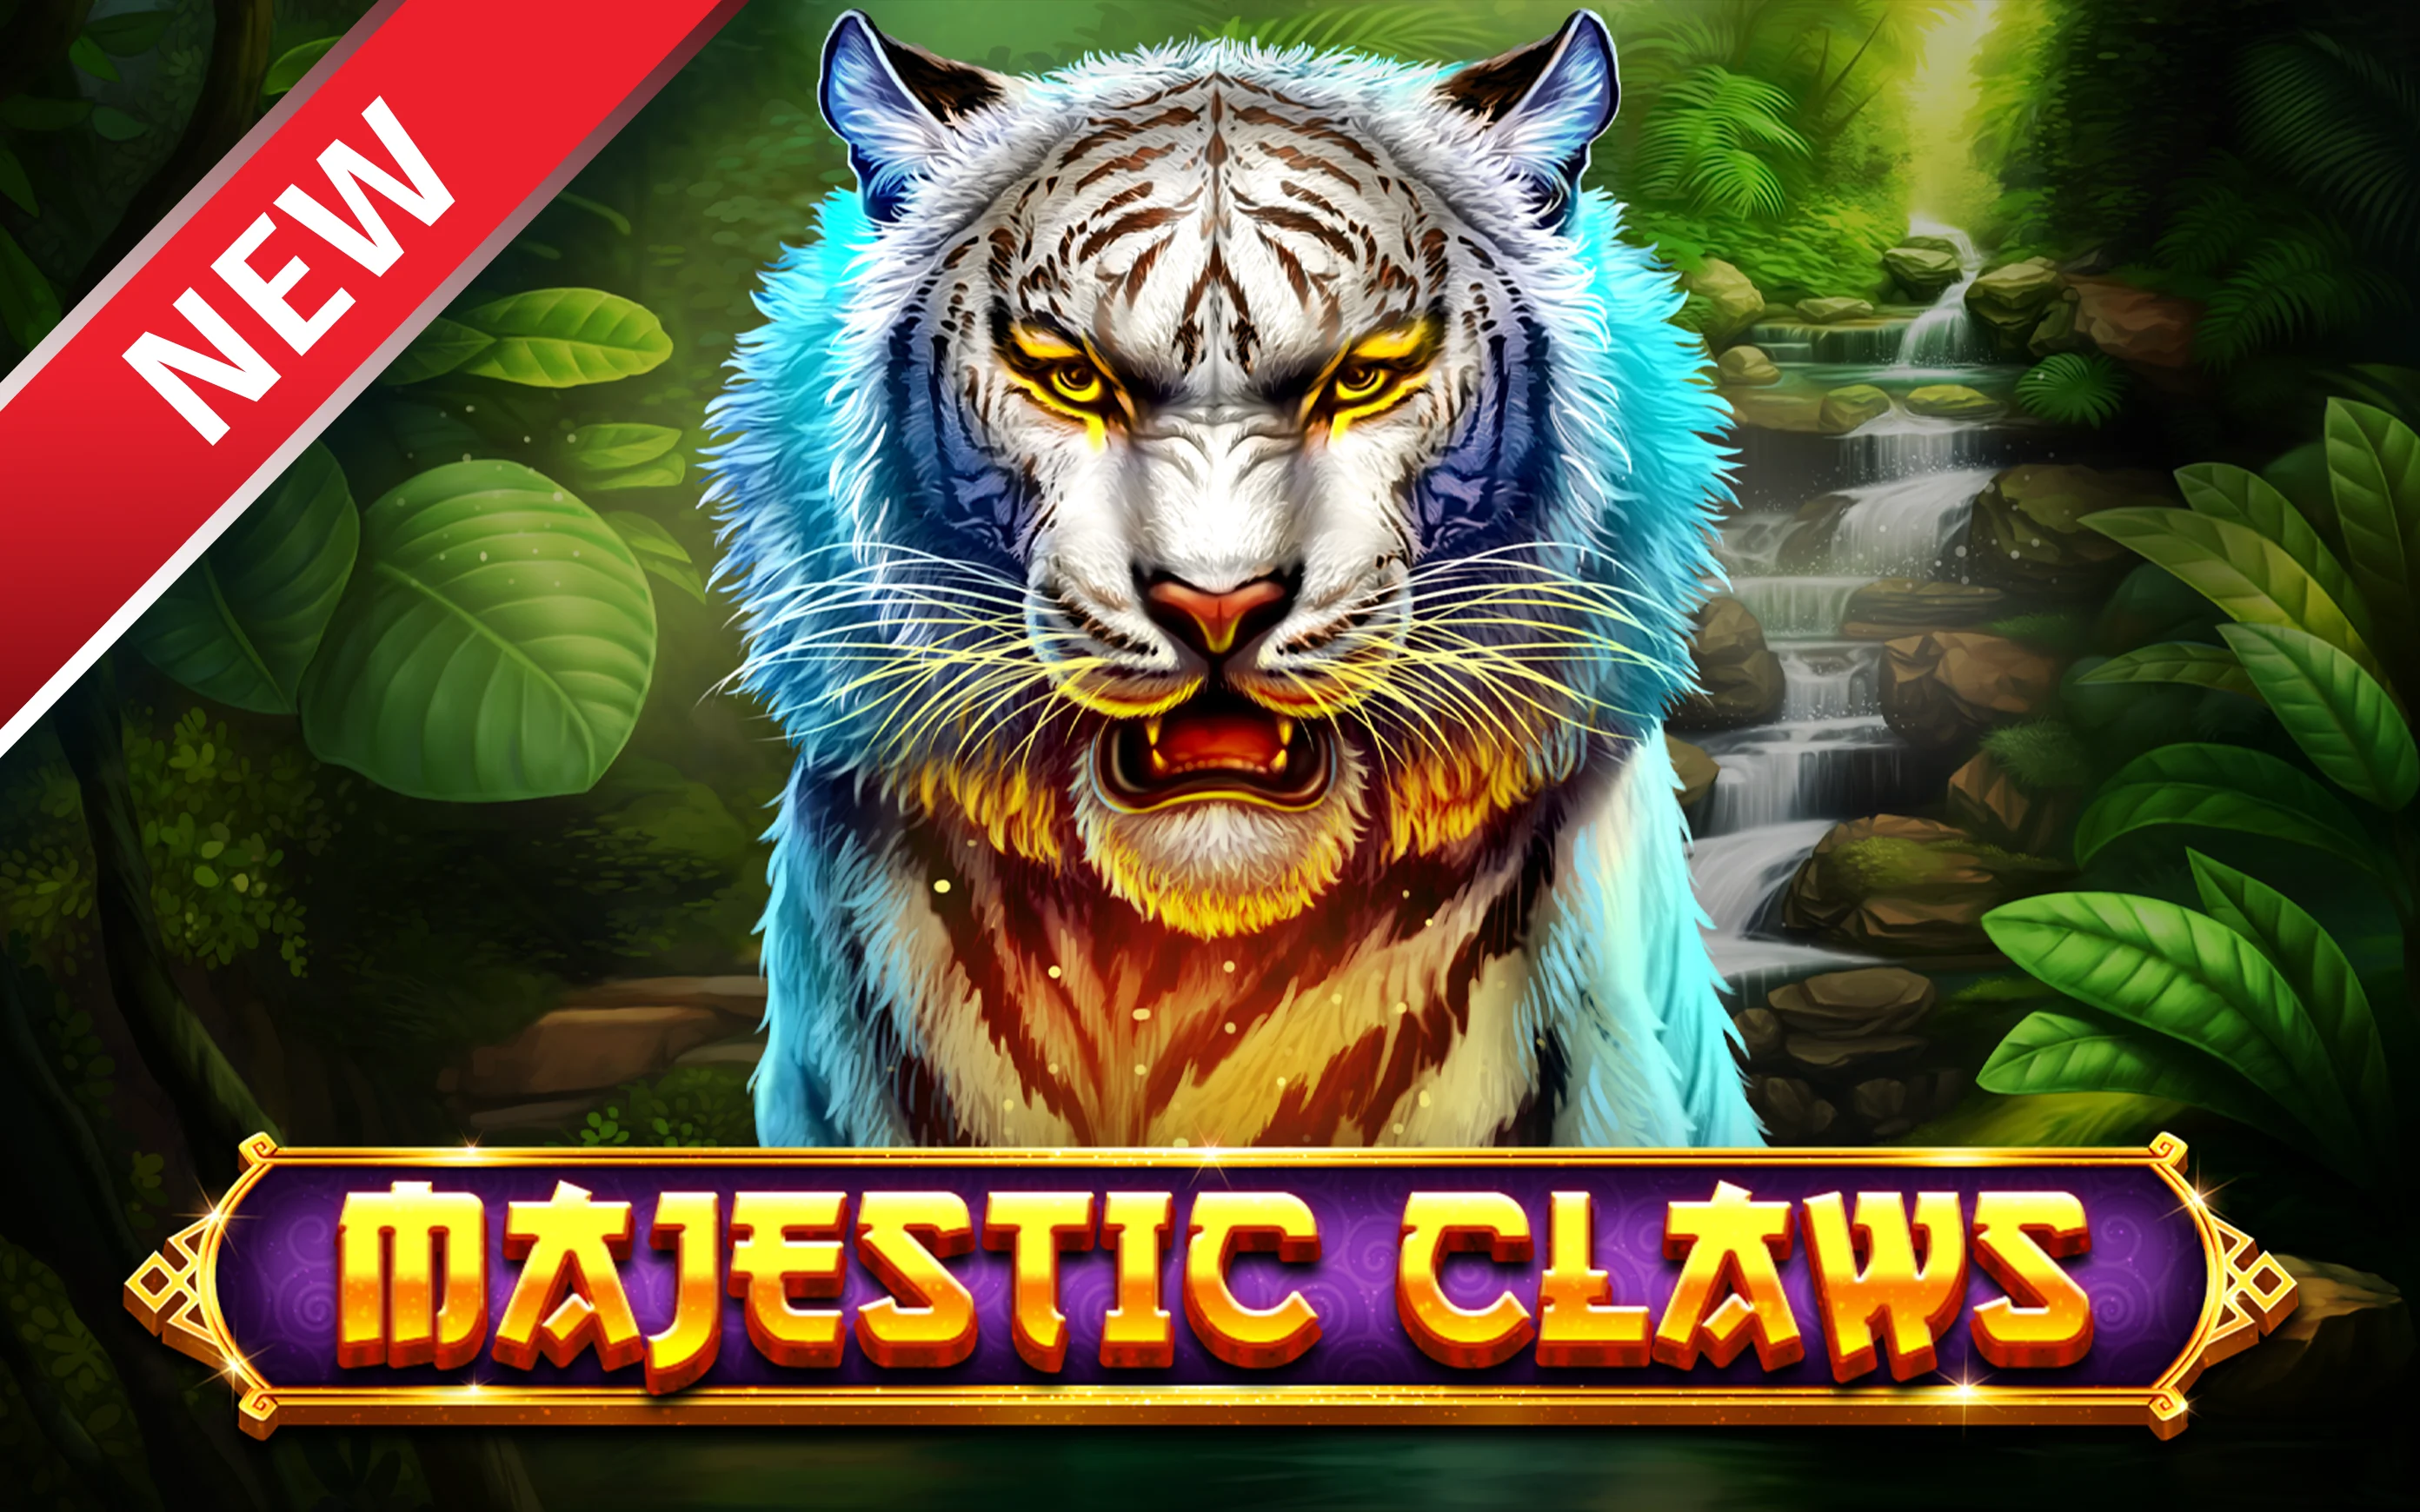 Play Majestic Claws on Starcasino.be online casino